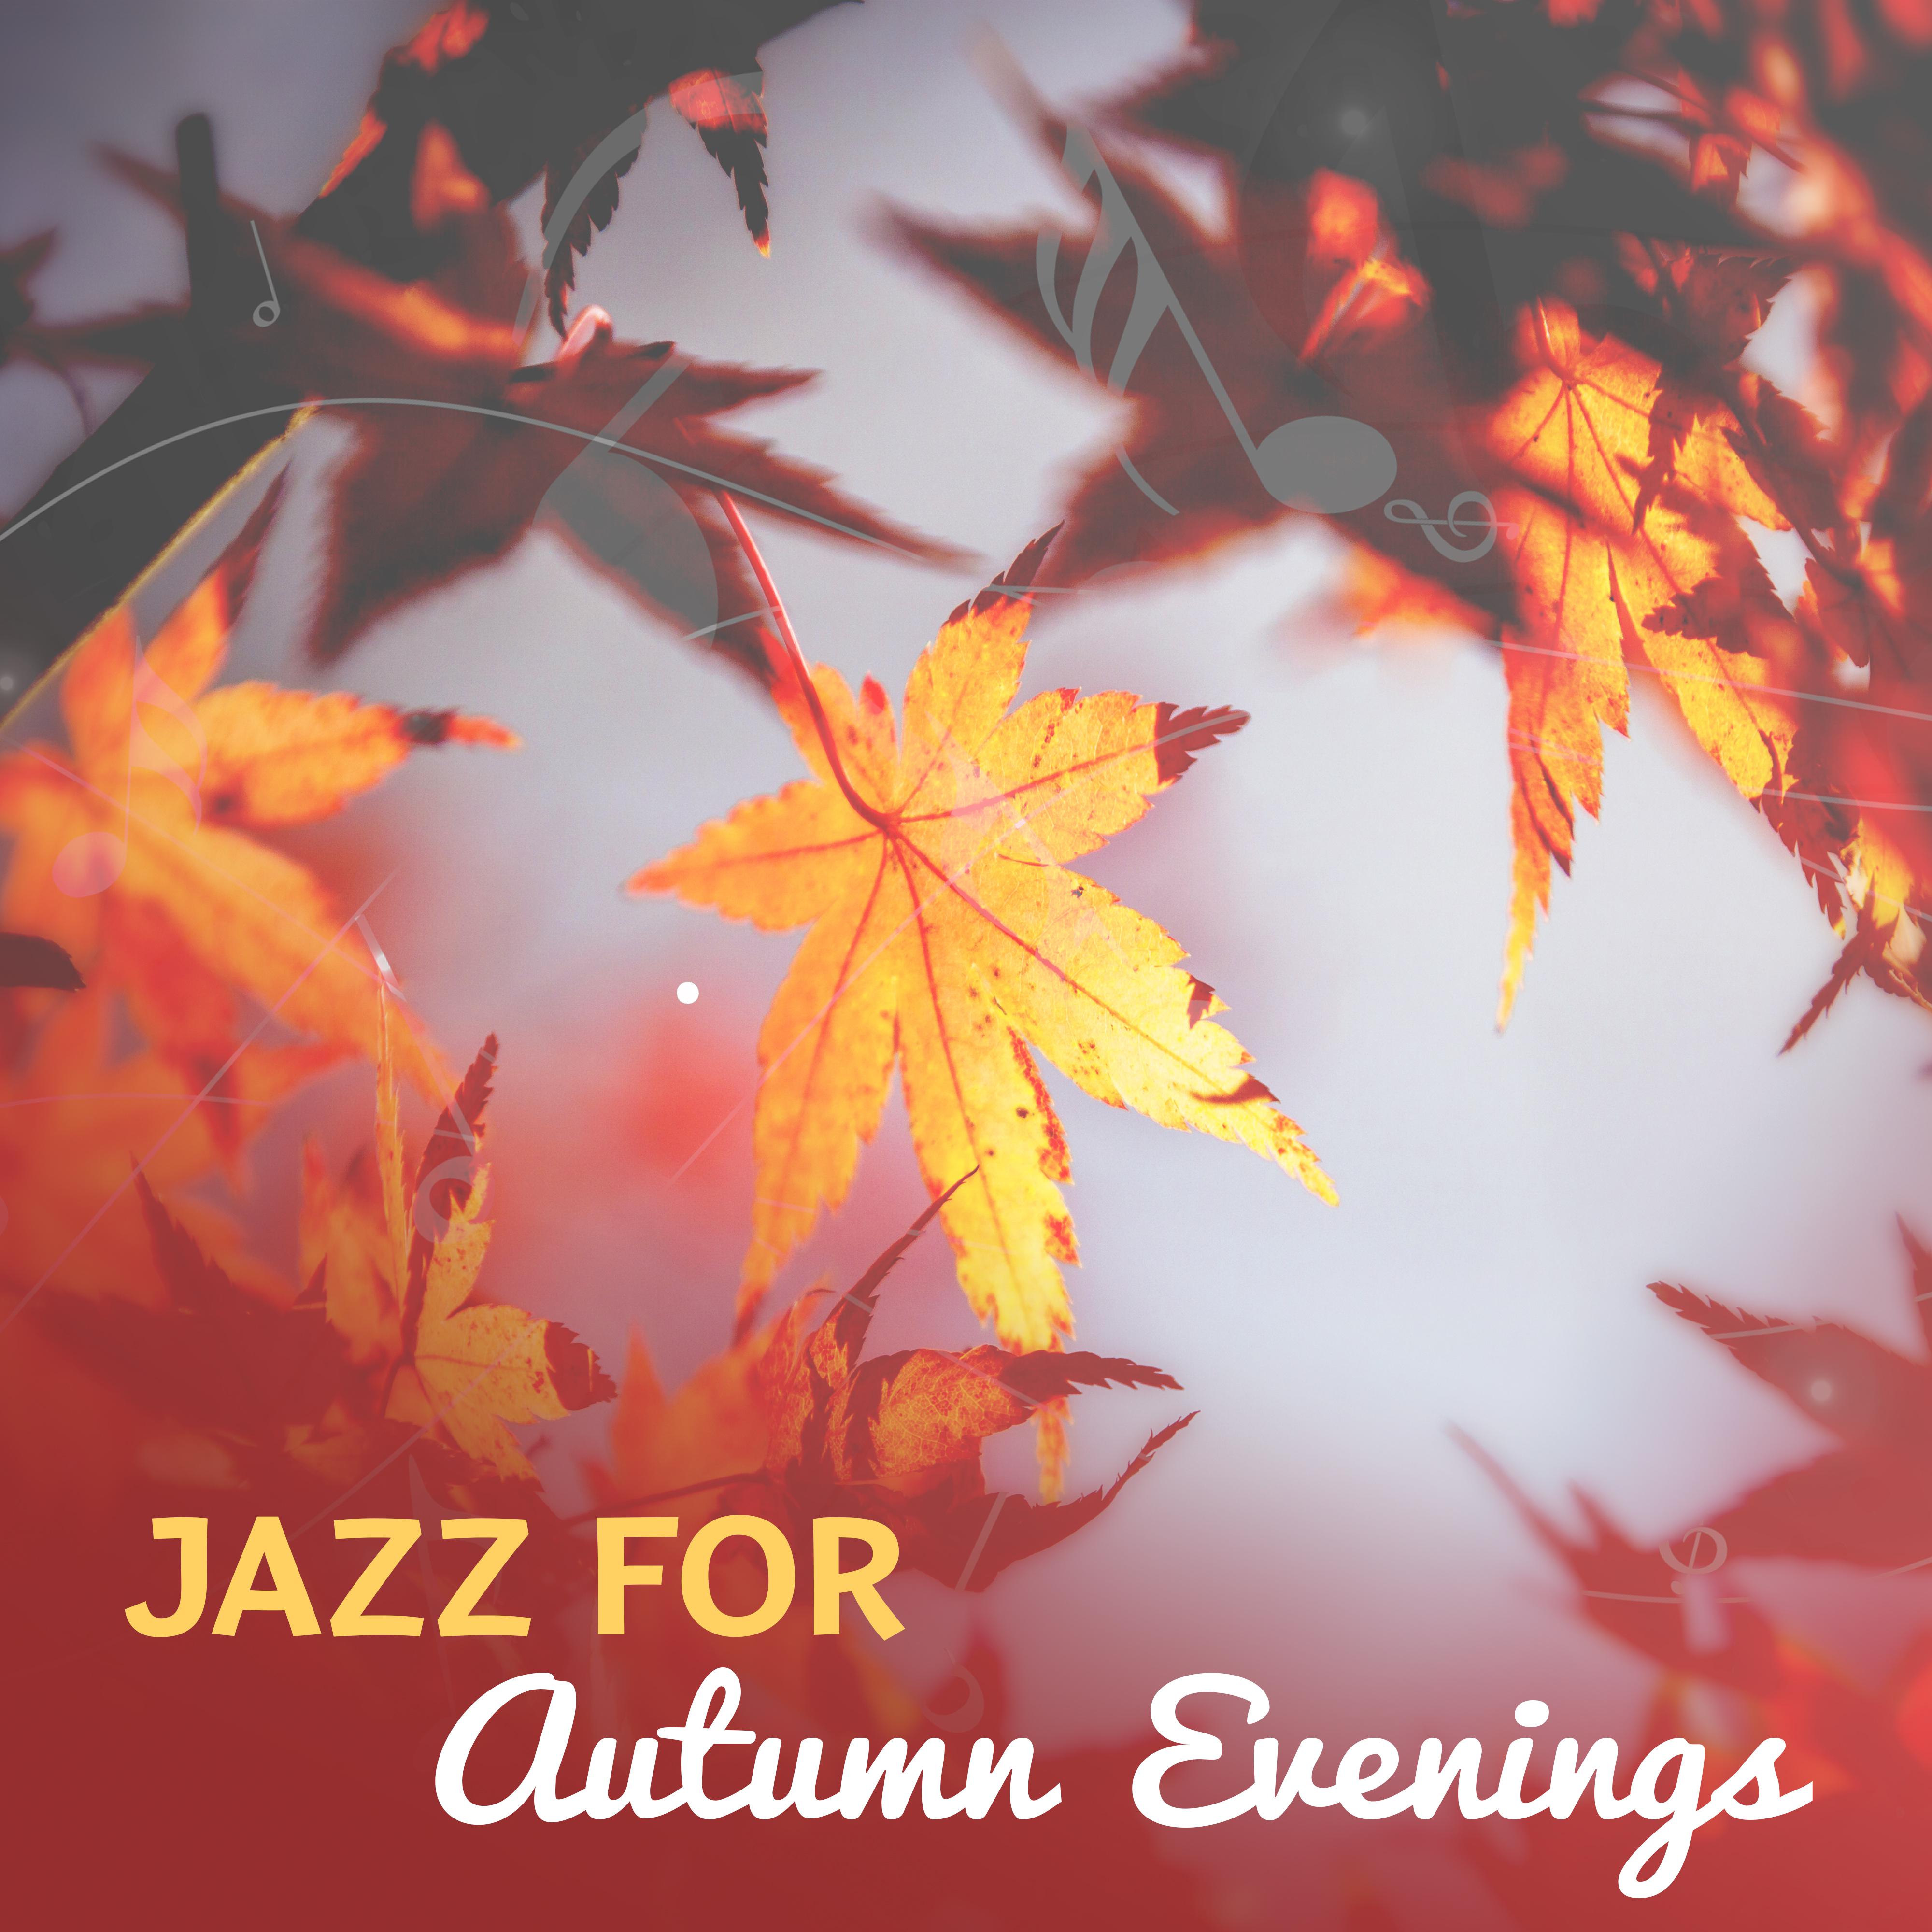 Jazz for Autumn Evenings  Ambient Jazz Music, Romantic Jazz, Essential Melodies,  Piano Sounds